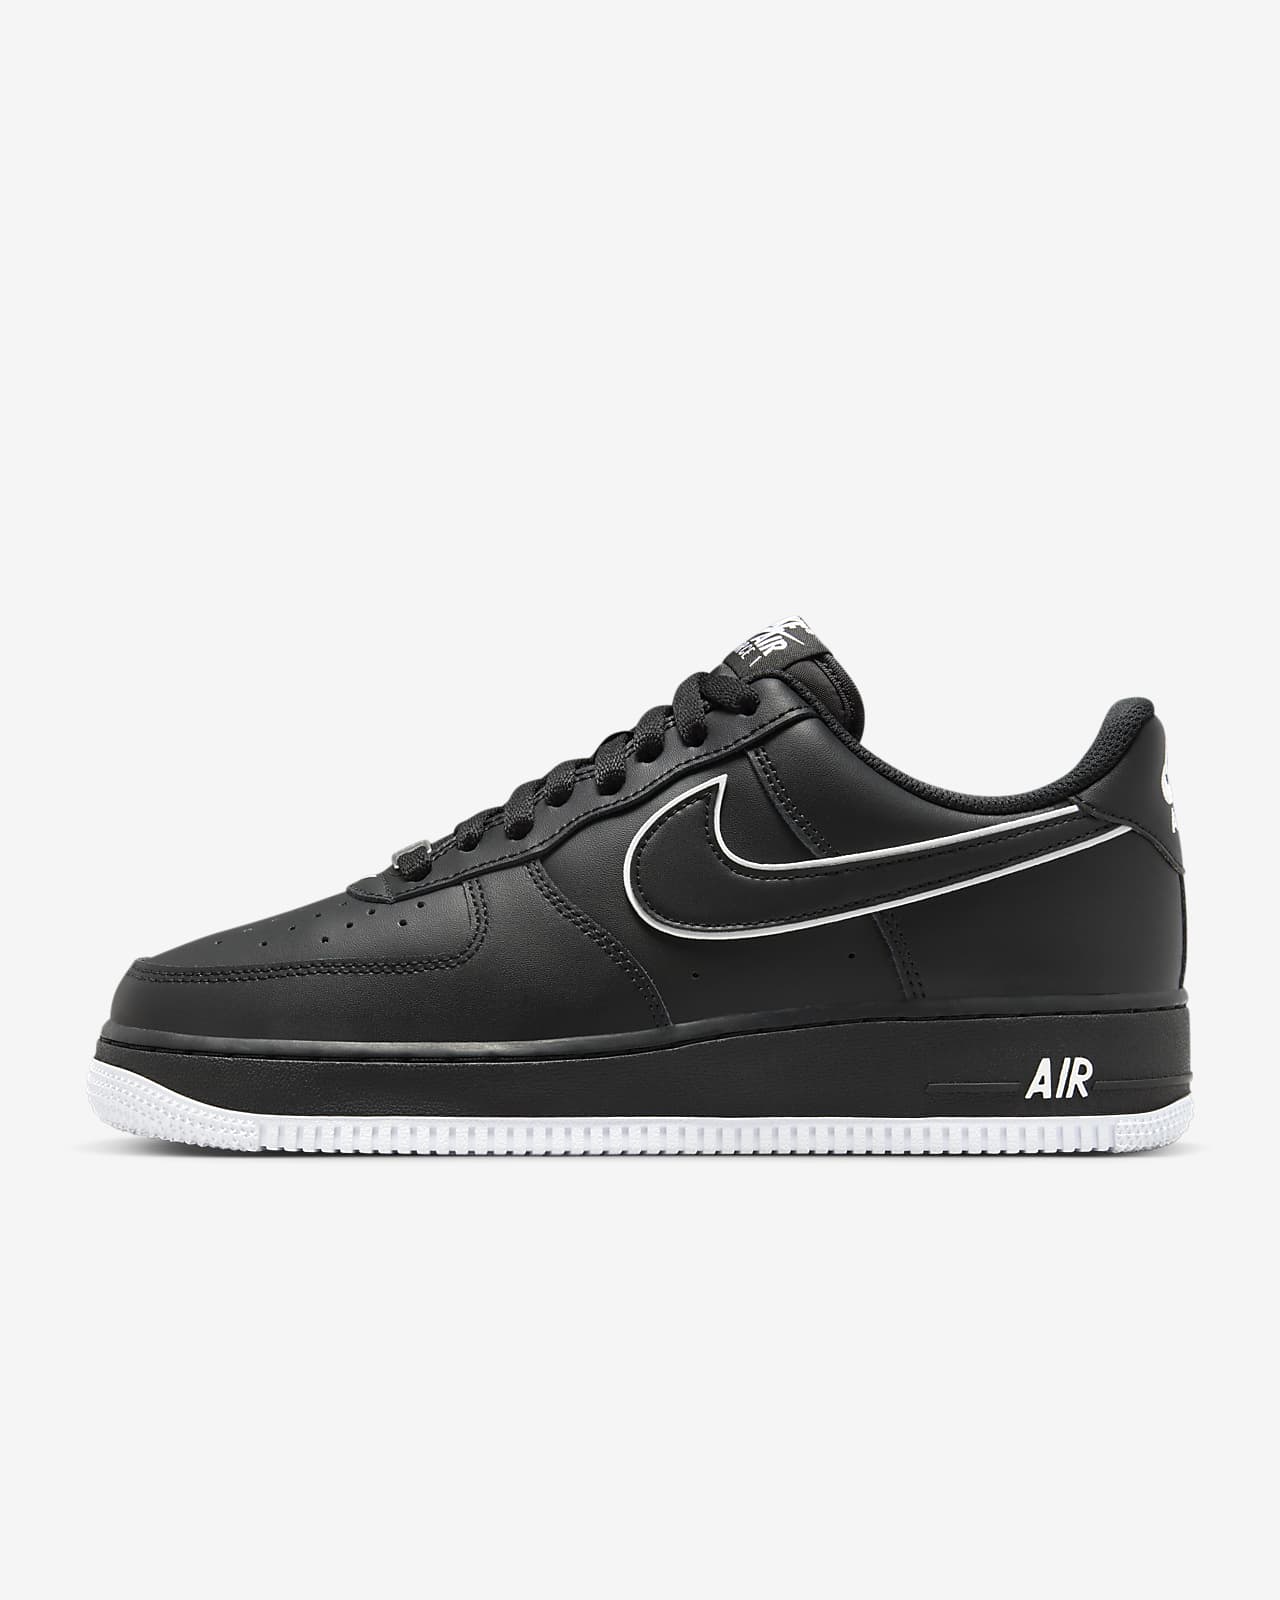 Chaussures, Baskets et Sneakers pour Homme. Nike FR